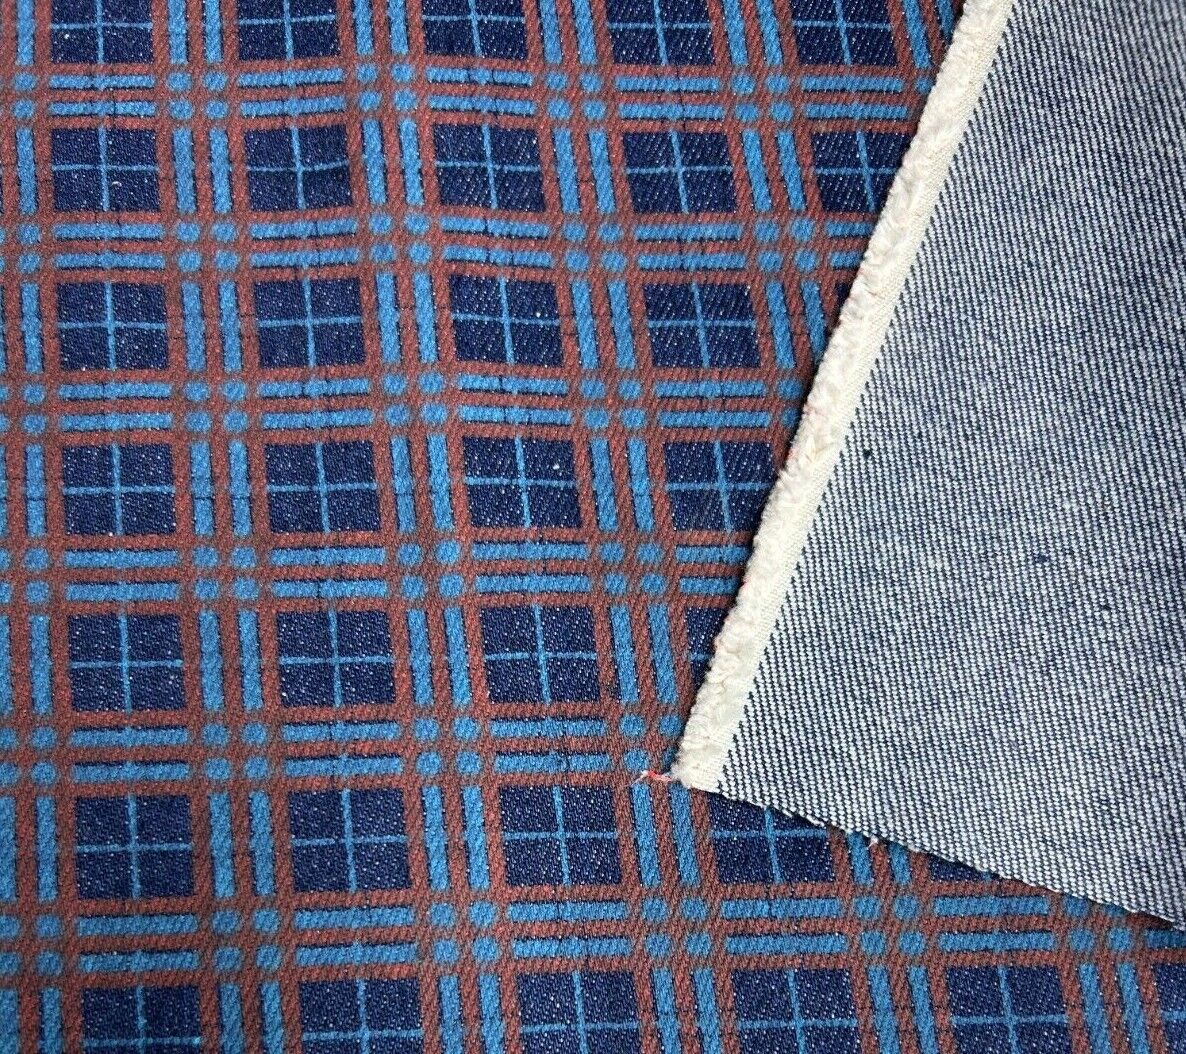 Cotton Denim Fabric Blue Brown Checked Printed 55" Wide 500 gsm